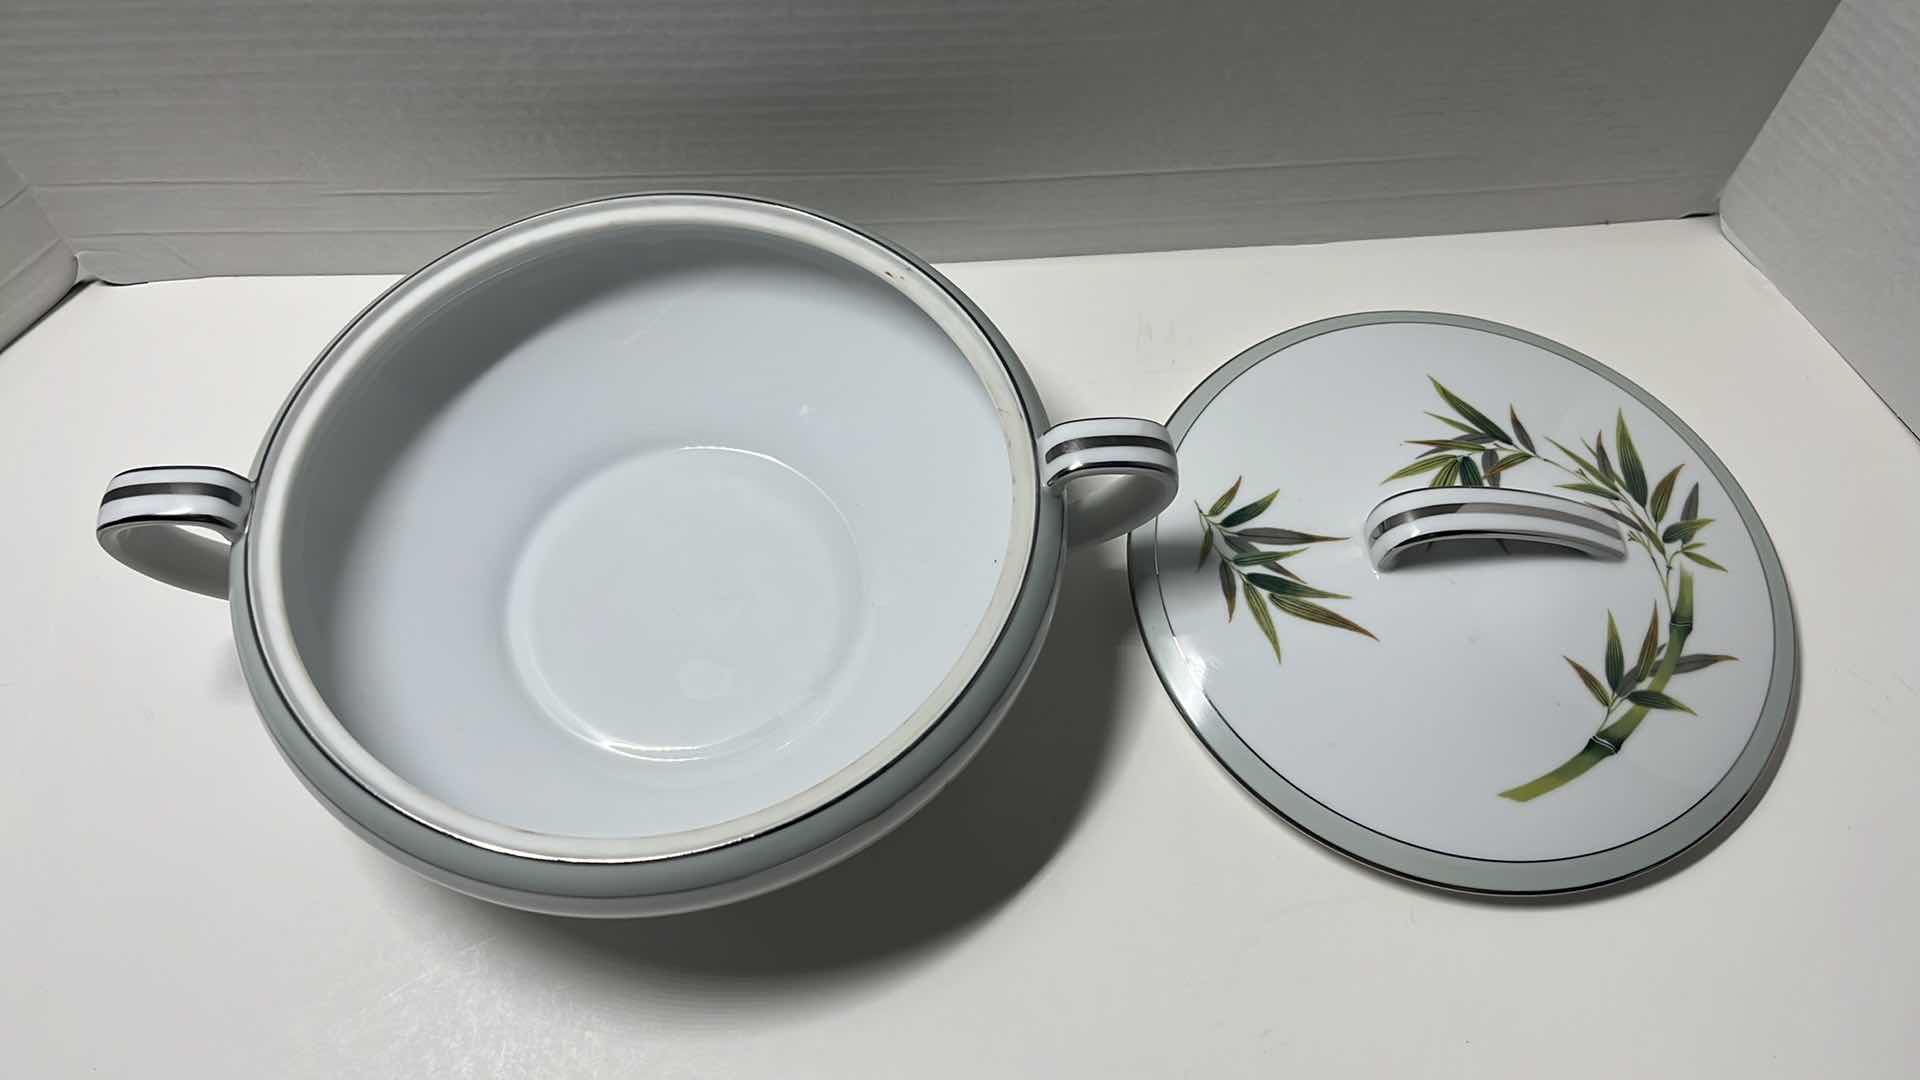 Photo 5 of NORITAKE RC JAPAN, STYLE 232 BAMBOO CHINA, ROUND COVERED VEGETABLE DISH 9.25” X 12” H4.5” & 10” OVAL VEGETABLE BOWL 7” X 10.75” H2.5” (2 PCS)